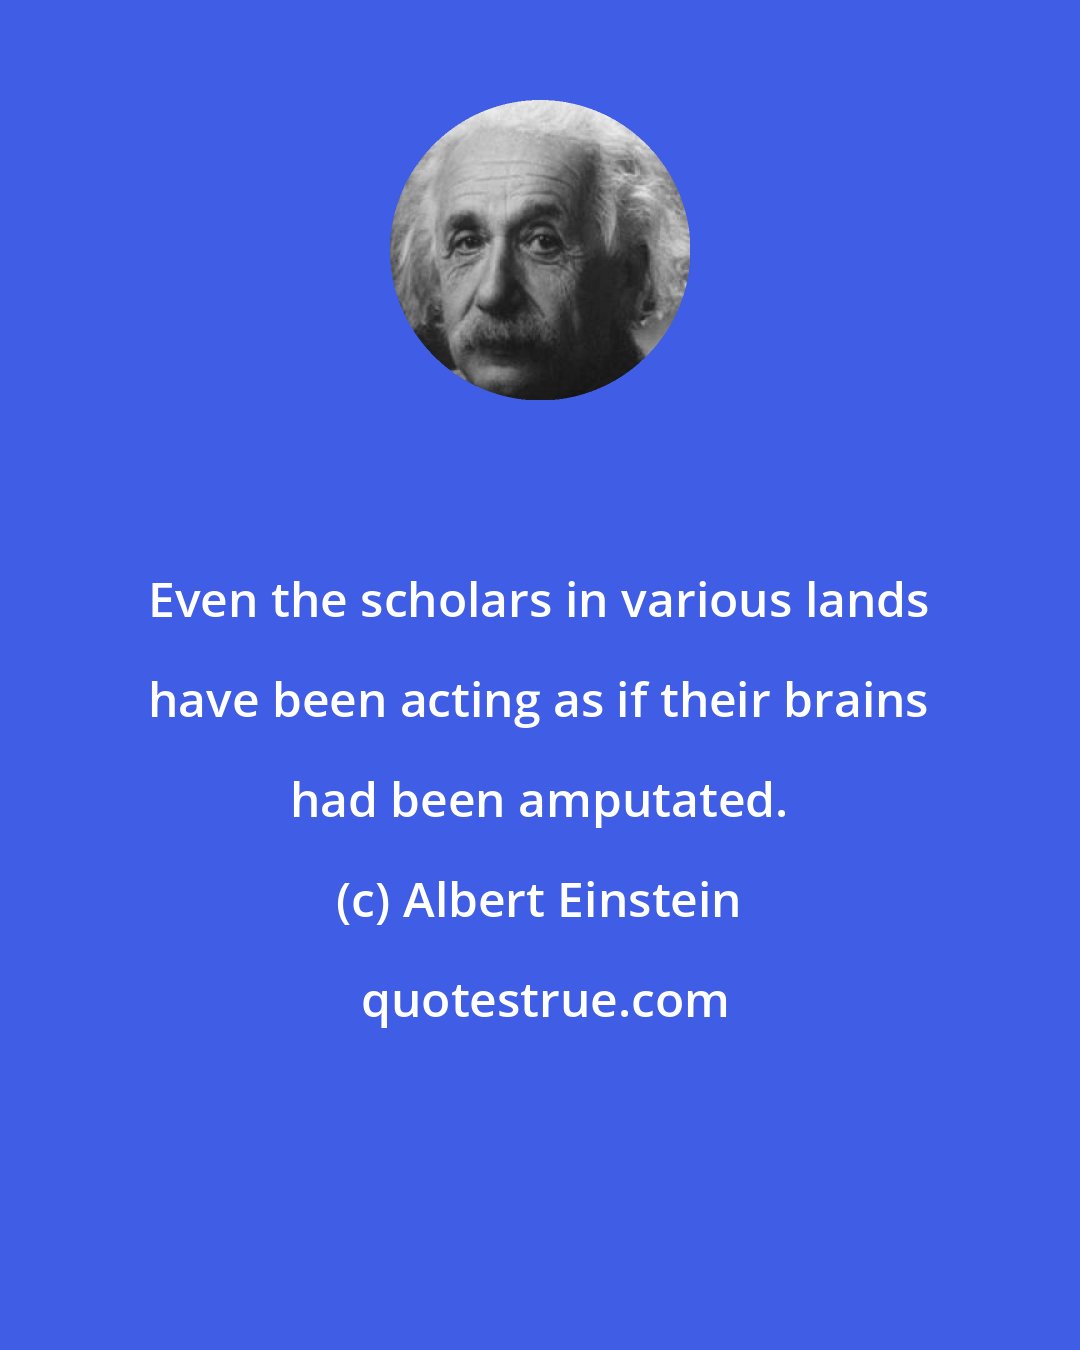 Albert Einstein: Even the scholars in various lands have been acting as if their brains had been amputated.